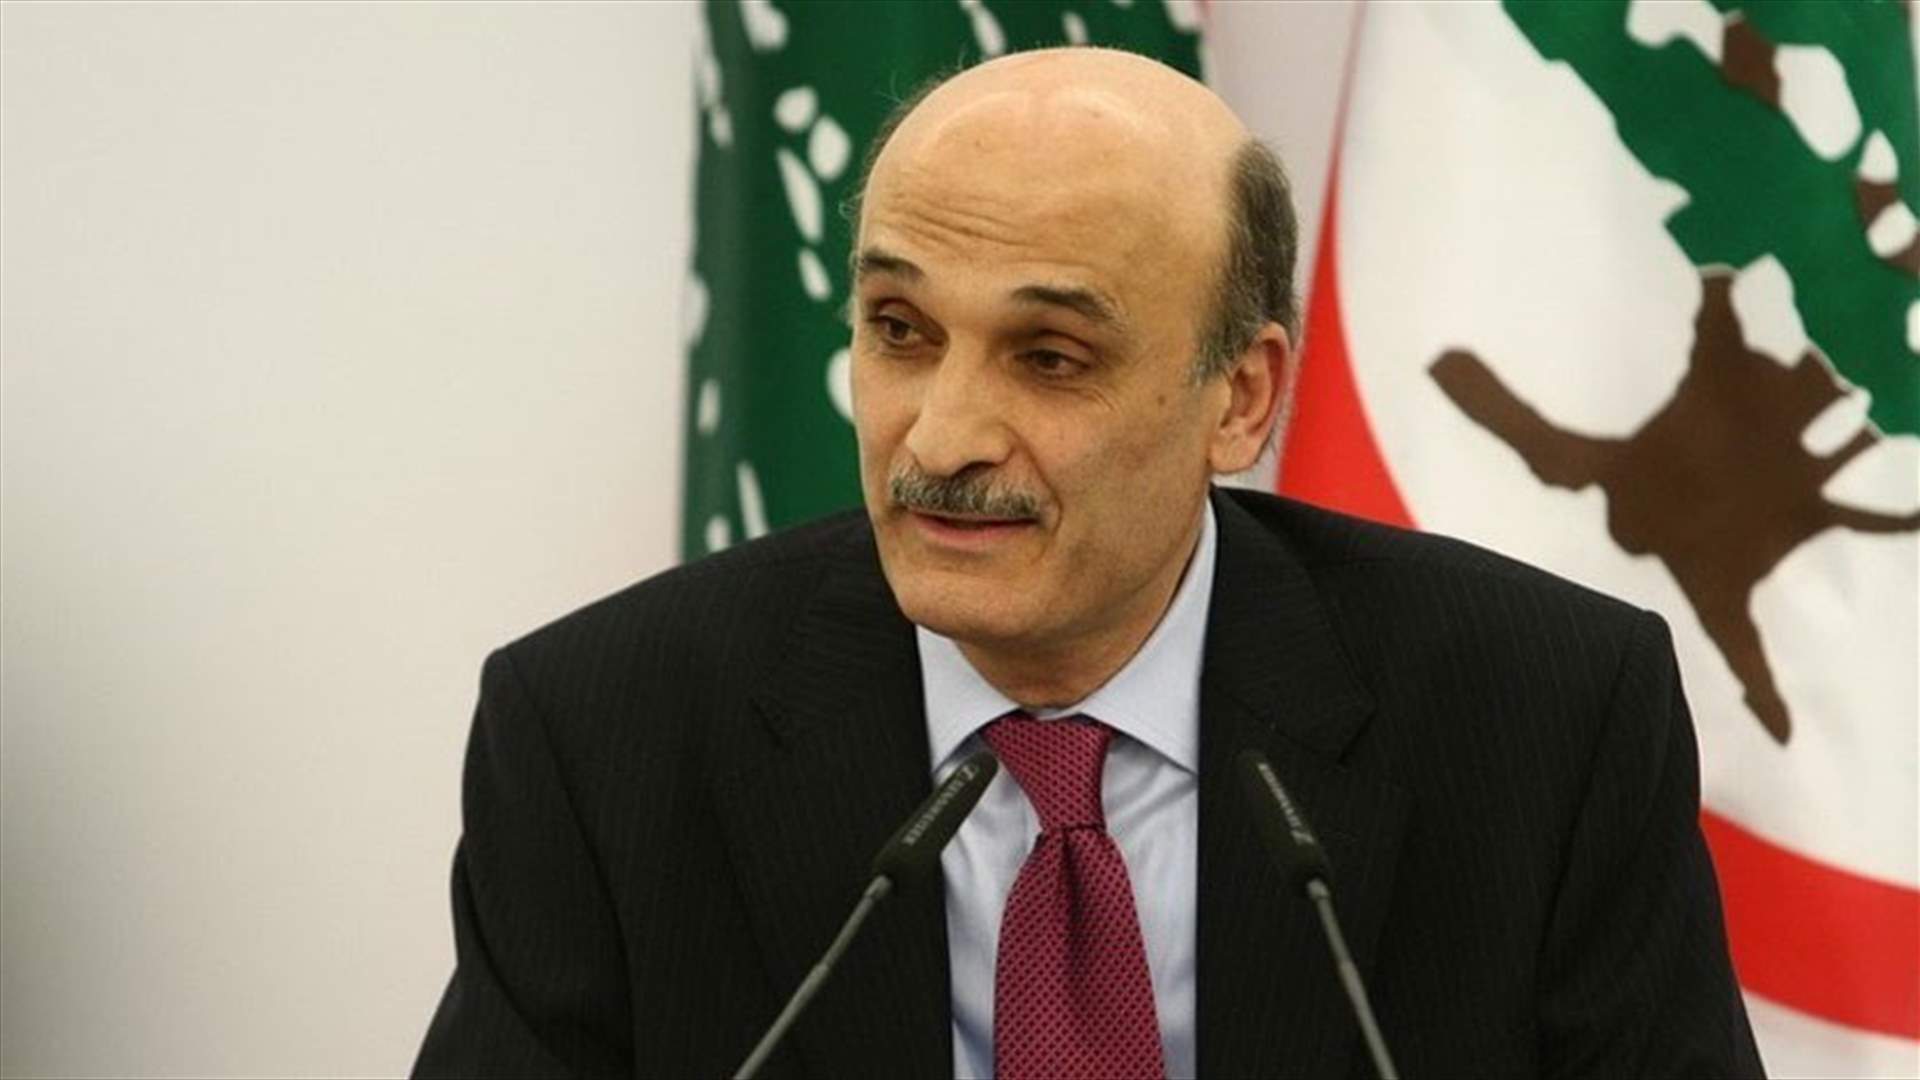 Geagea urges international community to put an end to massacres in Syria  